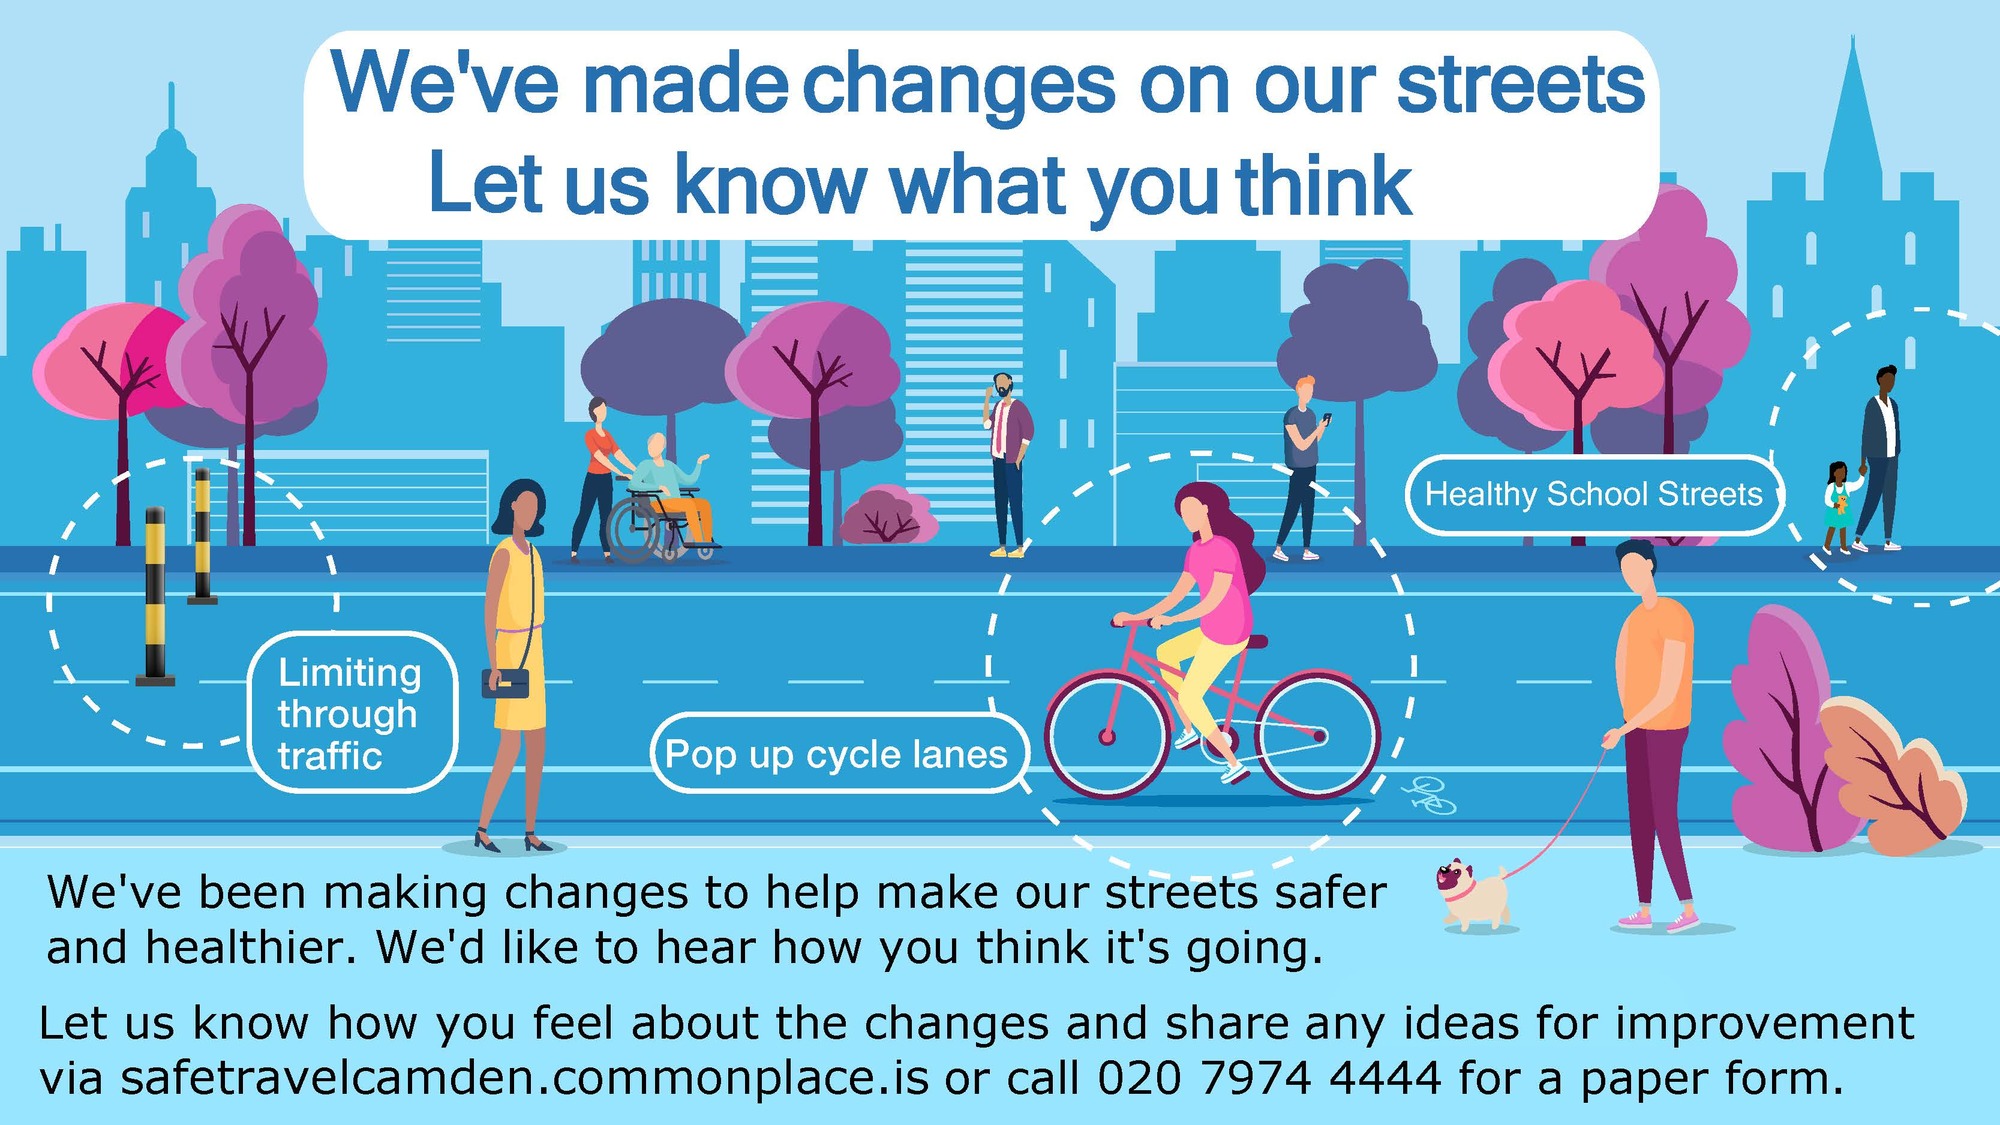 We're making changes on our streets - we'd like to know what you think 